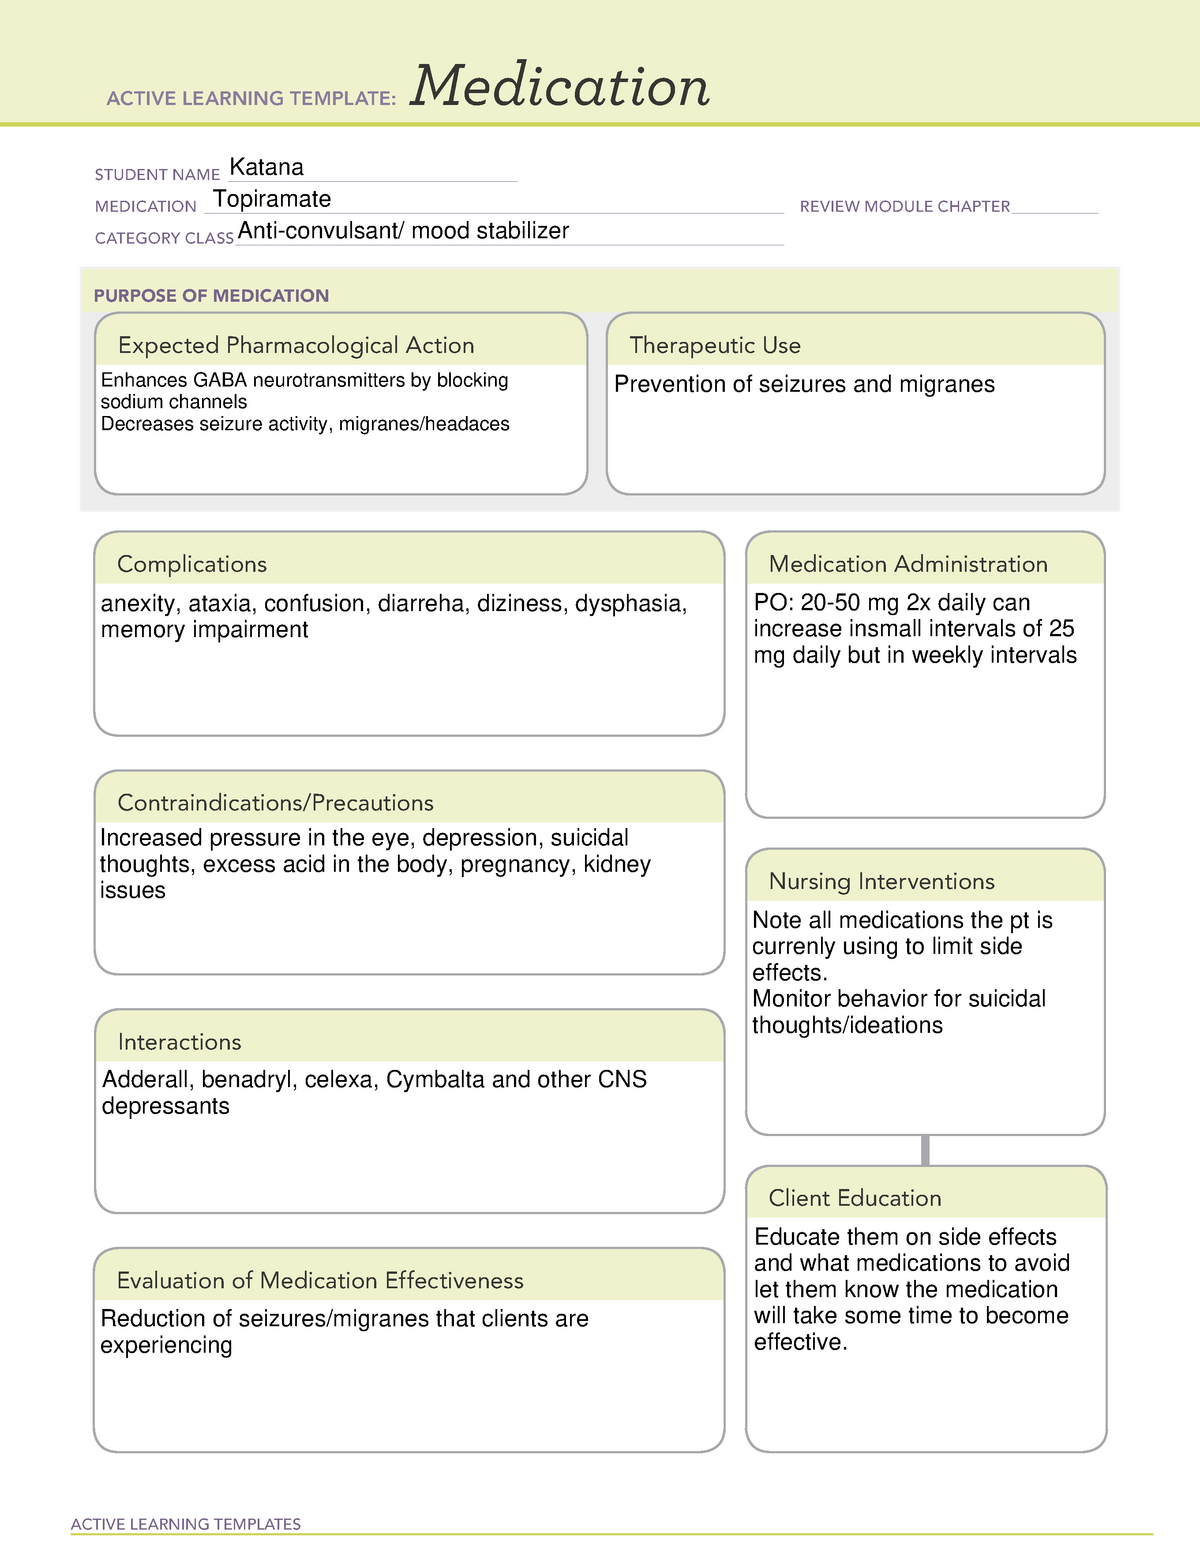 Topiramate Template 11 ACTIVE LEARNING TEMPLATES Medication STUDENT